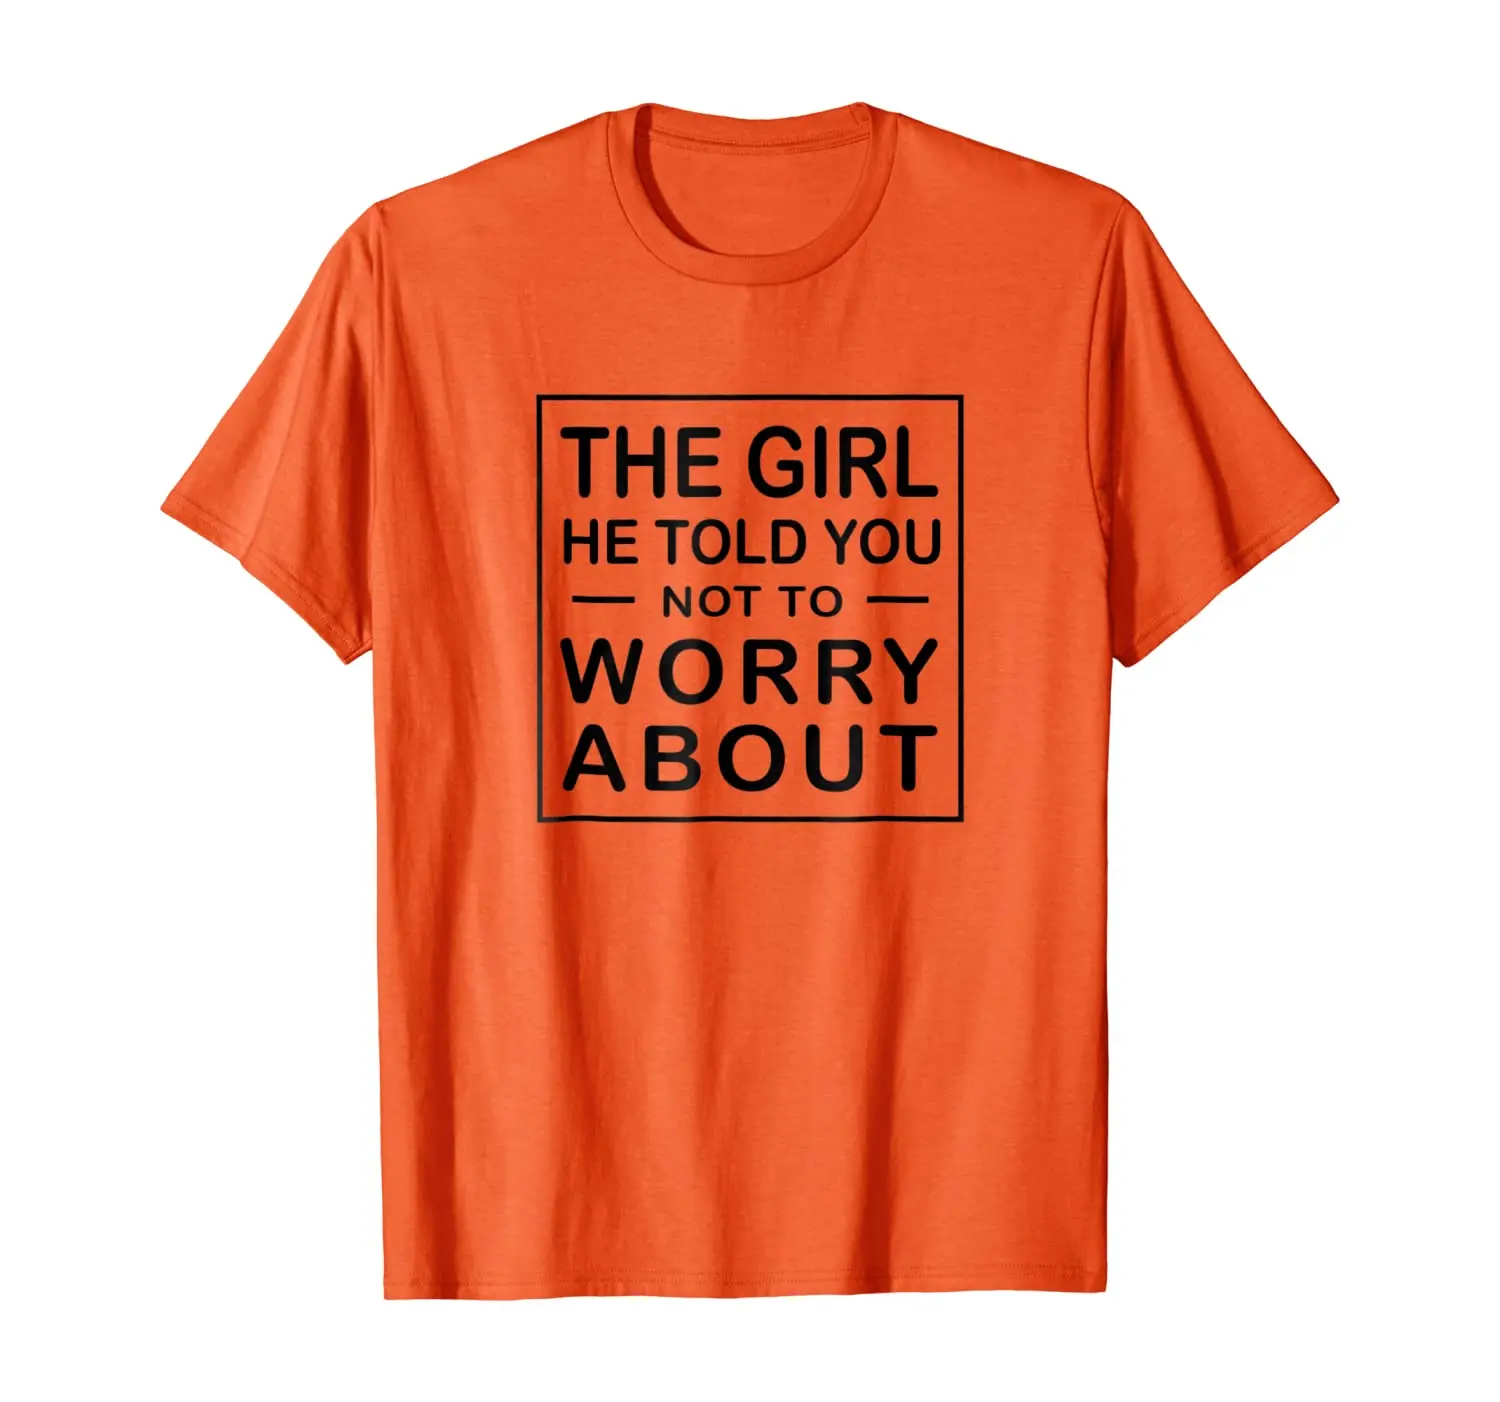 The Girl He Told You Not to Worry About T Shirt